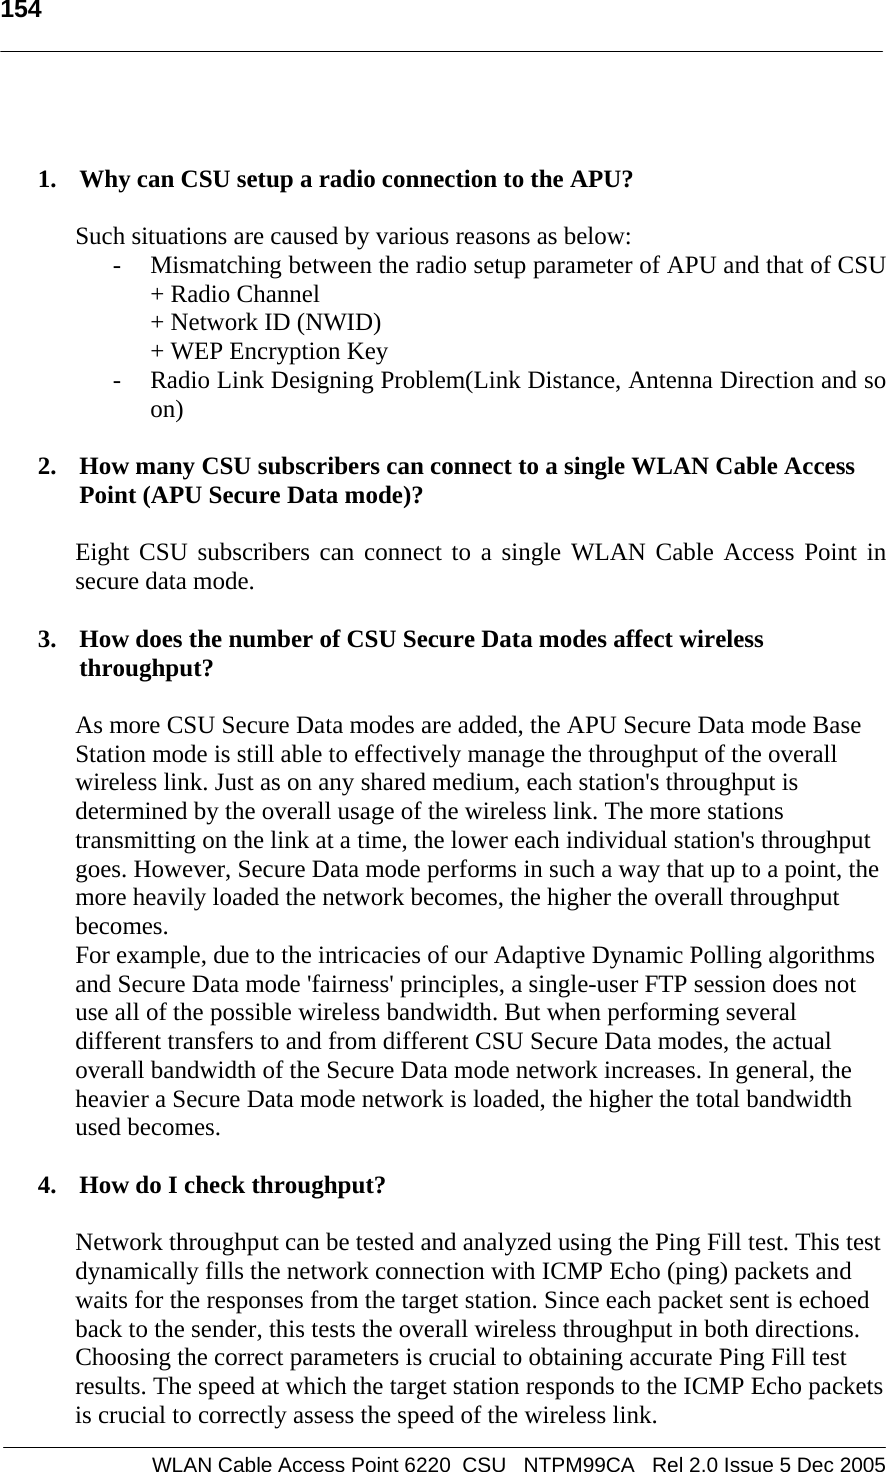   154   WLAN Cable Access Point 6220  CSU   NTPM99CA   Rel 2.0 Issue 5 Dec 2005   1. Why can CSU setup a radio connection to the APU?   Such situations are caused by various reasons as below: - Mismatching between the radio setup parameter of APU and that of CSU + Radio Channel  + Network ID (NWID) + WEP Encryption Key - Radio Link Designing Problem(Link Distance, Antenna Direction and so on)  2. How many CSU subscribers can connect to a single WLAN Cable Access Point (APU Secure Data mode)?  Eight CSU subscribers can connect to a single WLAN Cable Access Point in secure data mode.  3. How does the number of CSU Secure Data modes affect wireless throughput?  As more CSU Secure Data modes are added, the APU Secure Data mode Base Station mode is still able to effectively manage the throughput of the overall wireless link. Just as on any shared medium, each station&apos;s throughput is determined by the overall usage of the wireless link. The more stations transmitting on the link at a time, the lower each individual station&apos;s throughput goes. However, Secure Data mode performs in such a way that up to a point, the more heavily loaded the network becomes, the higher the overall throughput becomes.  For example, due to the intricacies of our Adaptive Dynamic Polling algorithms and Secure Data mode &apos;fairness&apos; principles, a single-user FTP session does not use all of the possible wireless bandwidth. But when performing several different transfers to and from different CSU Secure Data modes, the actual overall bandwidth of the Secure Data mode network increases. In general, the heavier a Secure Data mode network is loaded, the higher the total bandwidth used becomes.  4. How do I check throughput?  Network throughput can be tested and analyzed using the Ping Fill test. This test dynamically fills the network connection with ICMP Echo (ping) packets and waits for the responses from the target station. Since each packet sent is echoed back to the sender, this tests the overall wireless throughput in both directions. Choosing the correct parameters is crucial to obtaining accurate Ping Fill test results. The speed at which the target station responds to the ICMP Echo packets is crucial to correctly assess the speed of the wireless link.  